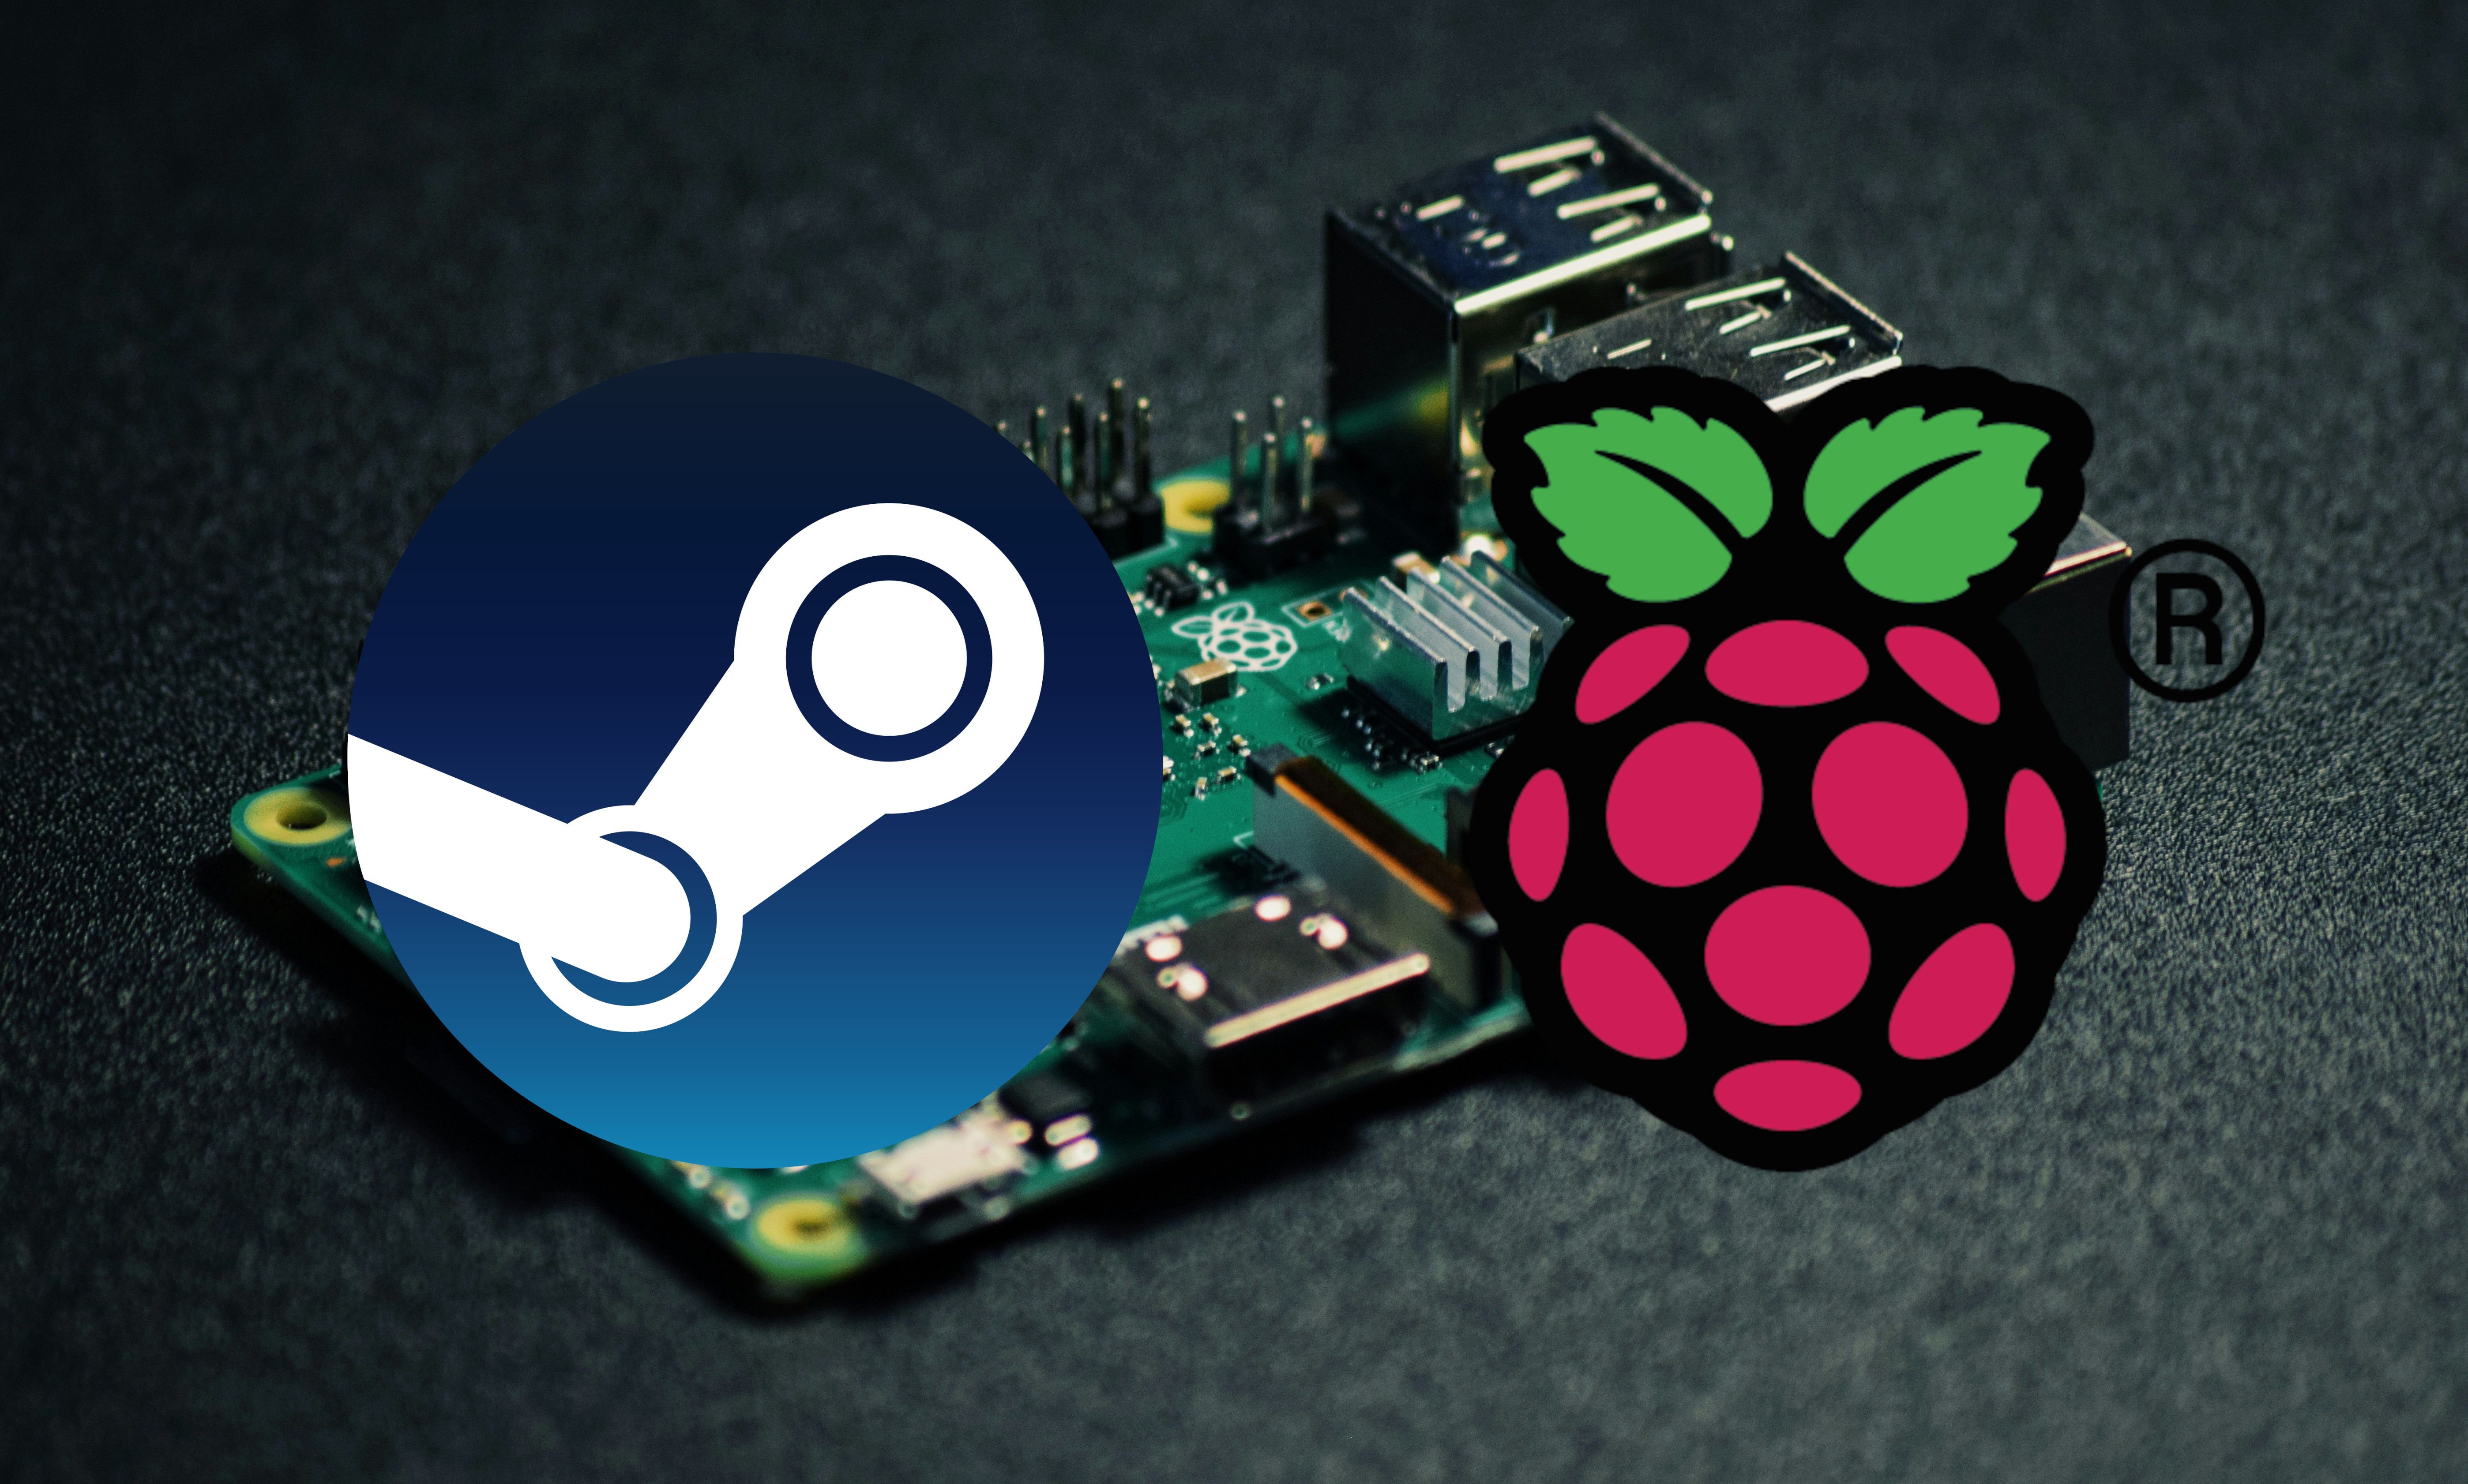 Overlay of the Steam and Raspberry Pi logos.